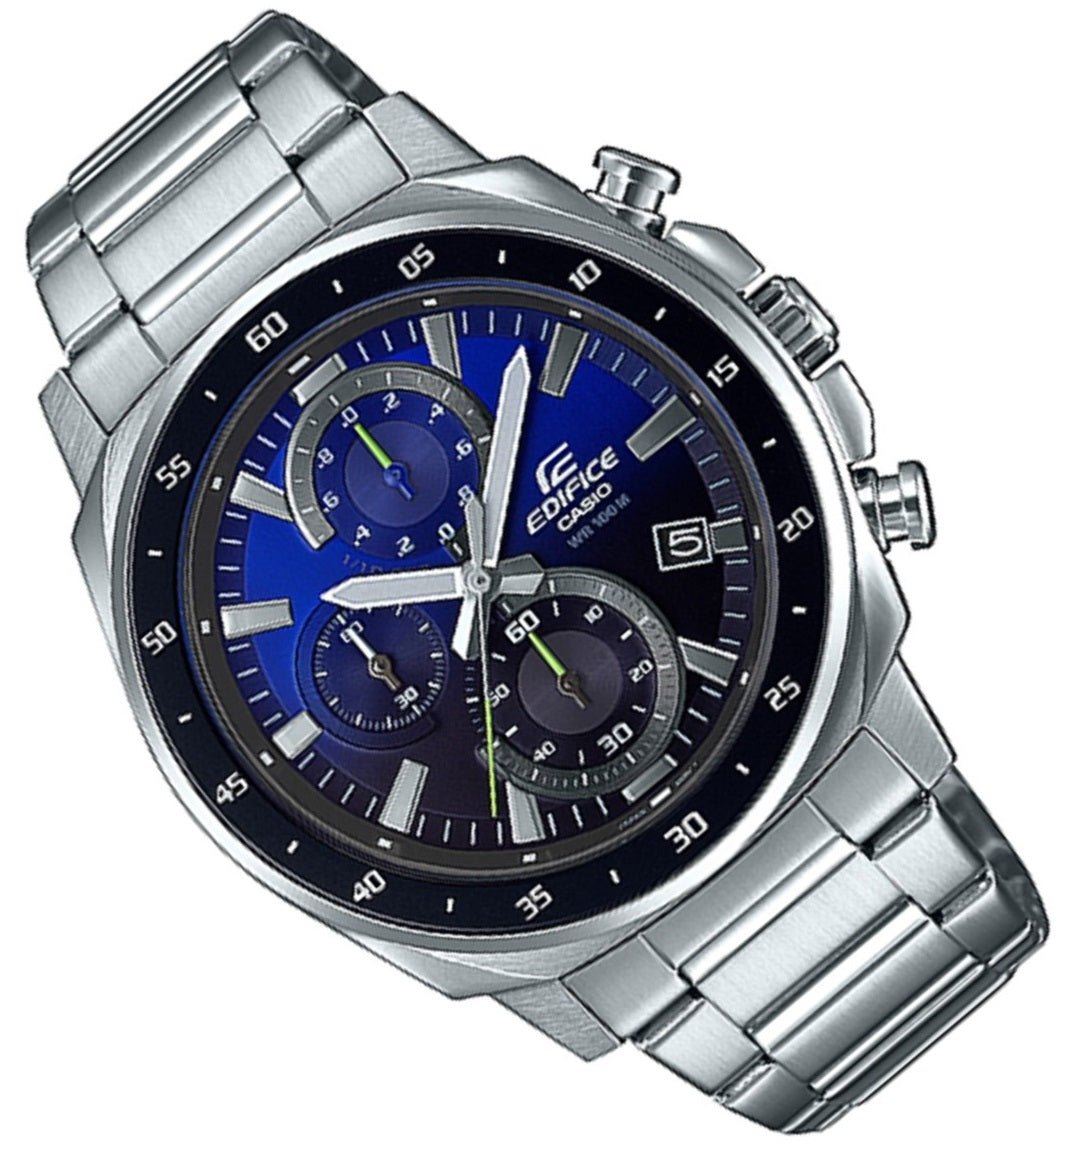 Casio Edifice EFV-600D-2A Chronograph Stainless Steel Strap Watch For Men-Watch Portal Philippines